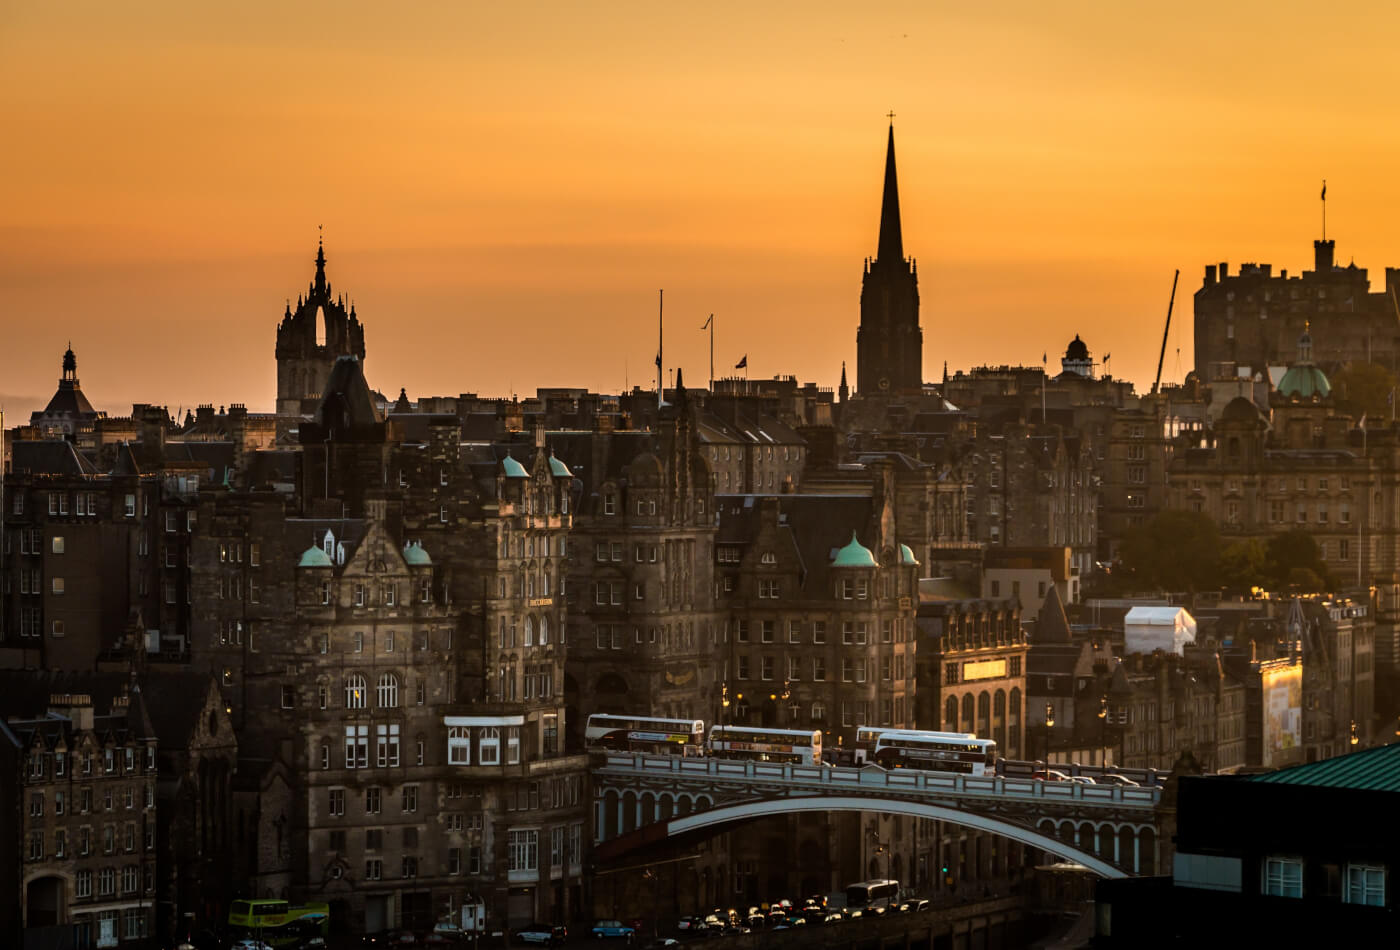 The architectural Edinburgh skyline with an orange sky in the background